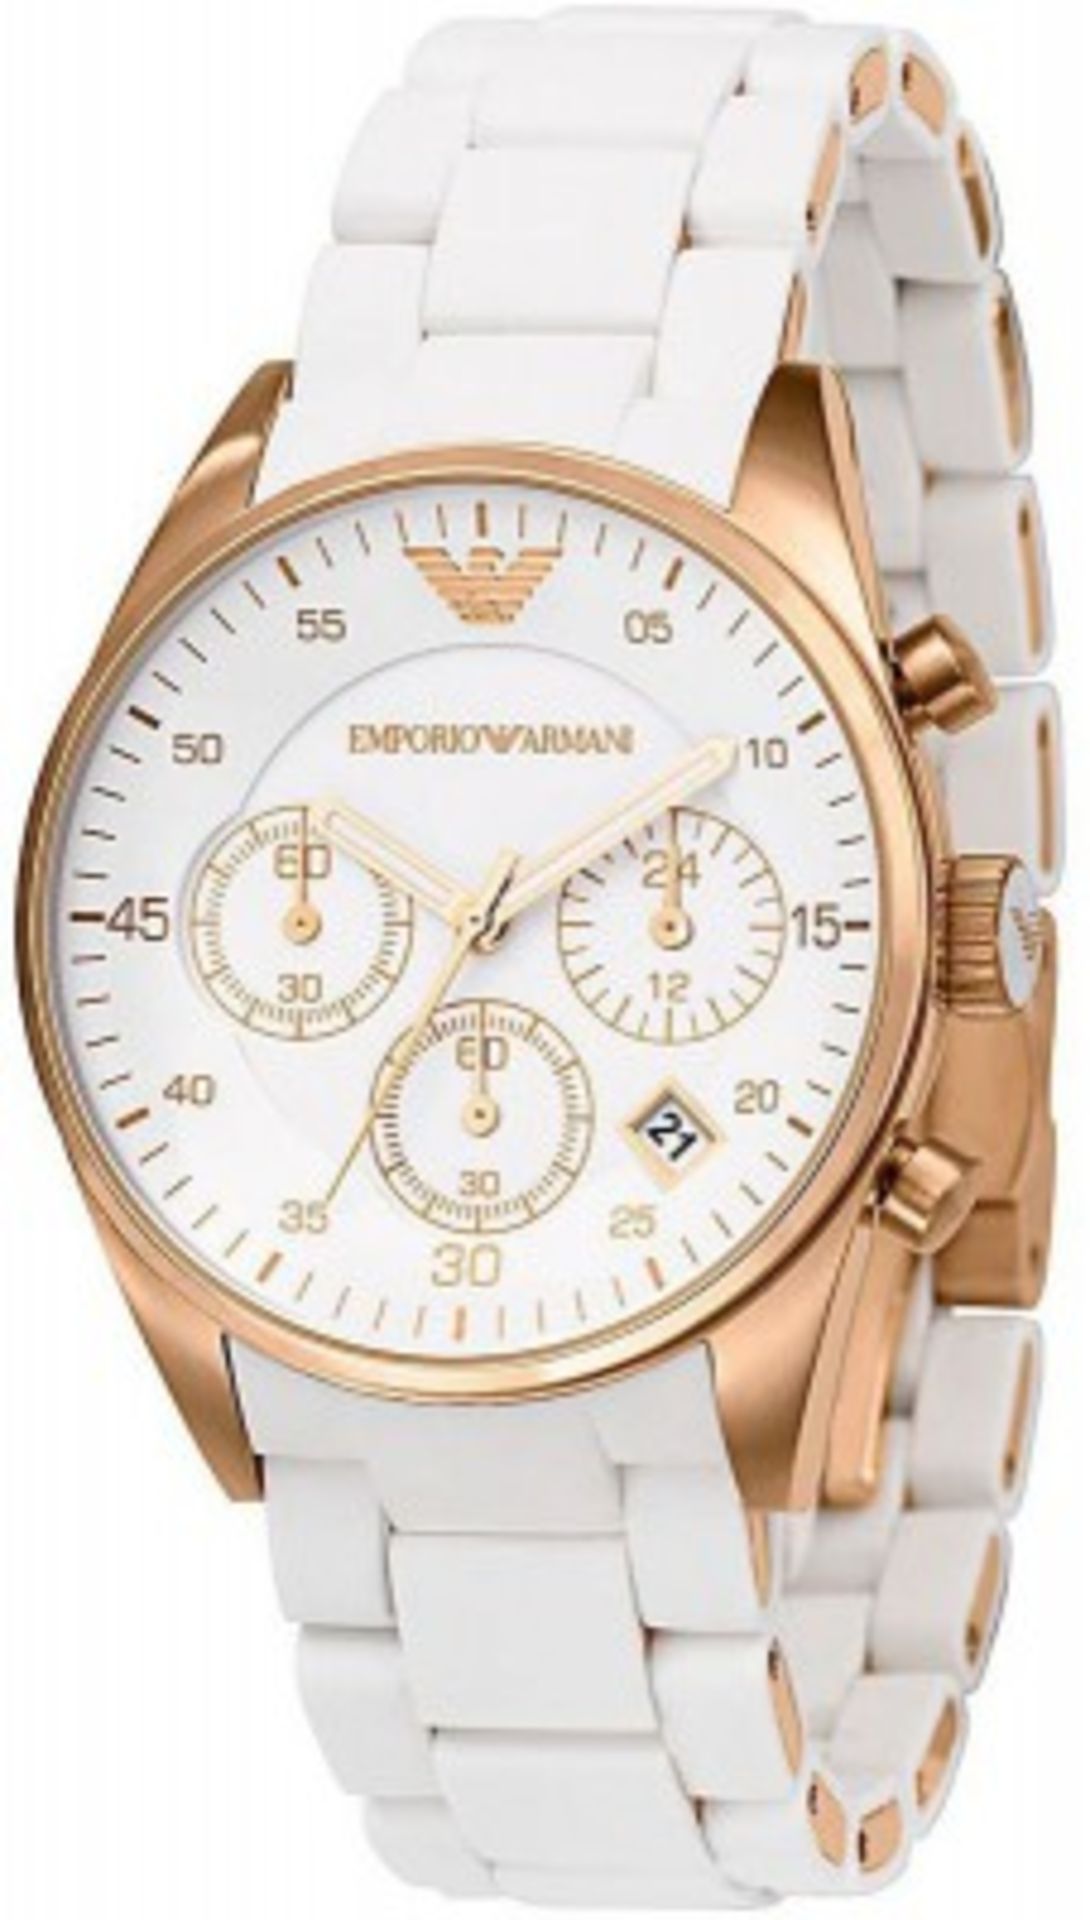 BOXED BRAND NEW EMPORIO ARMANI WHITE RUBBER/ROSE GOLD GENTS DESIGNER WRIST WATCH RRP £349.99 (MD-